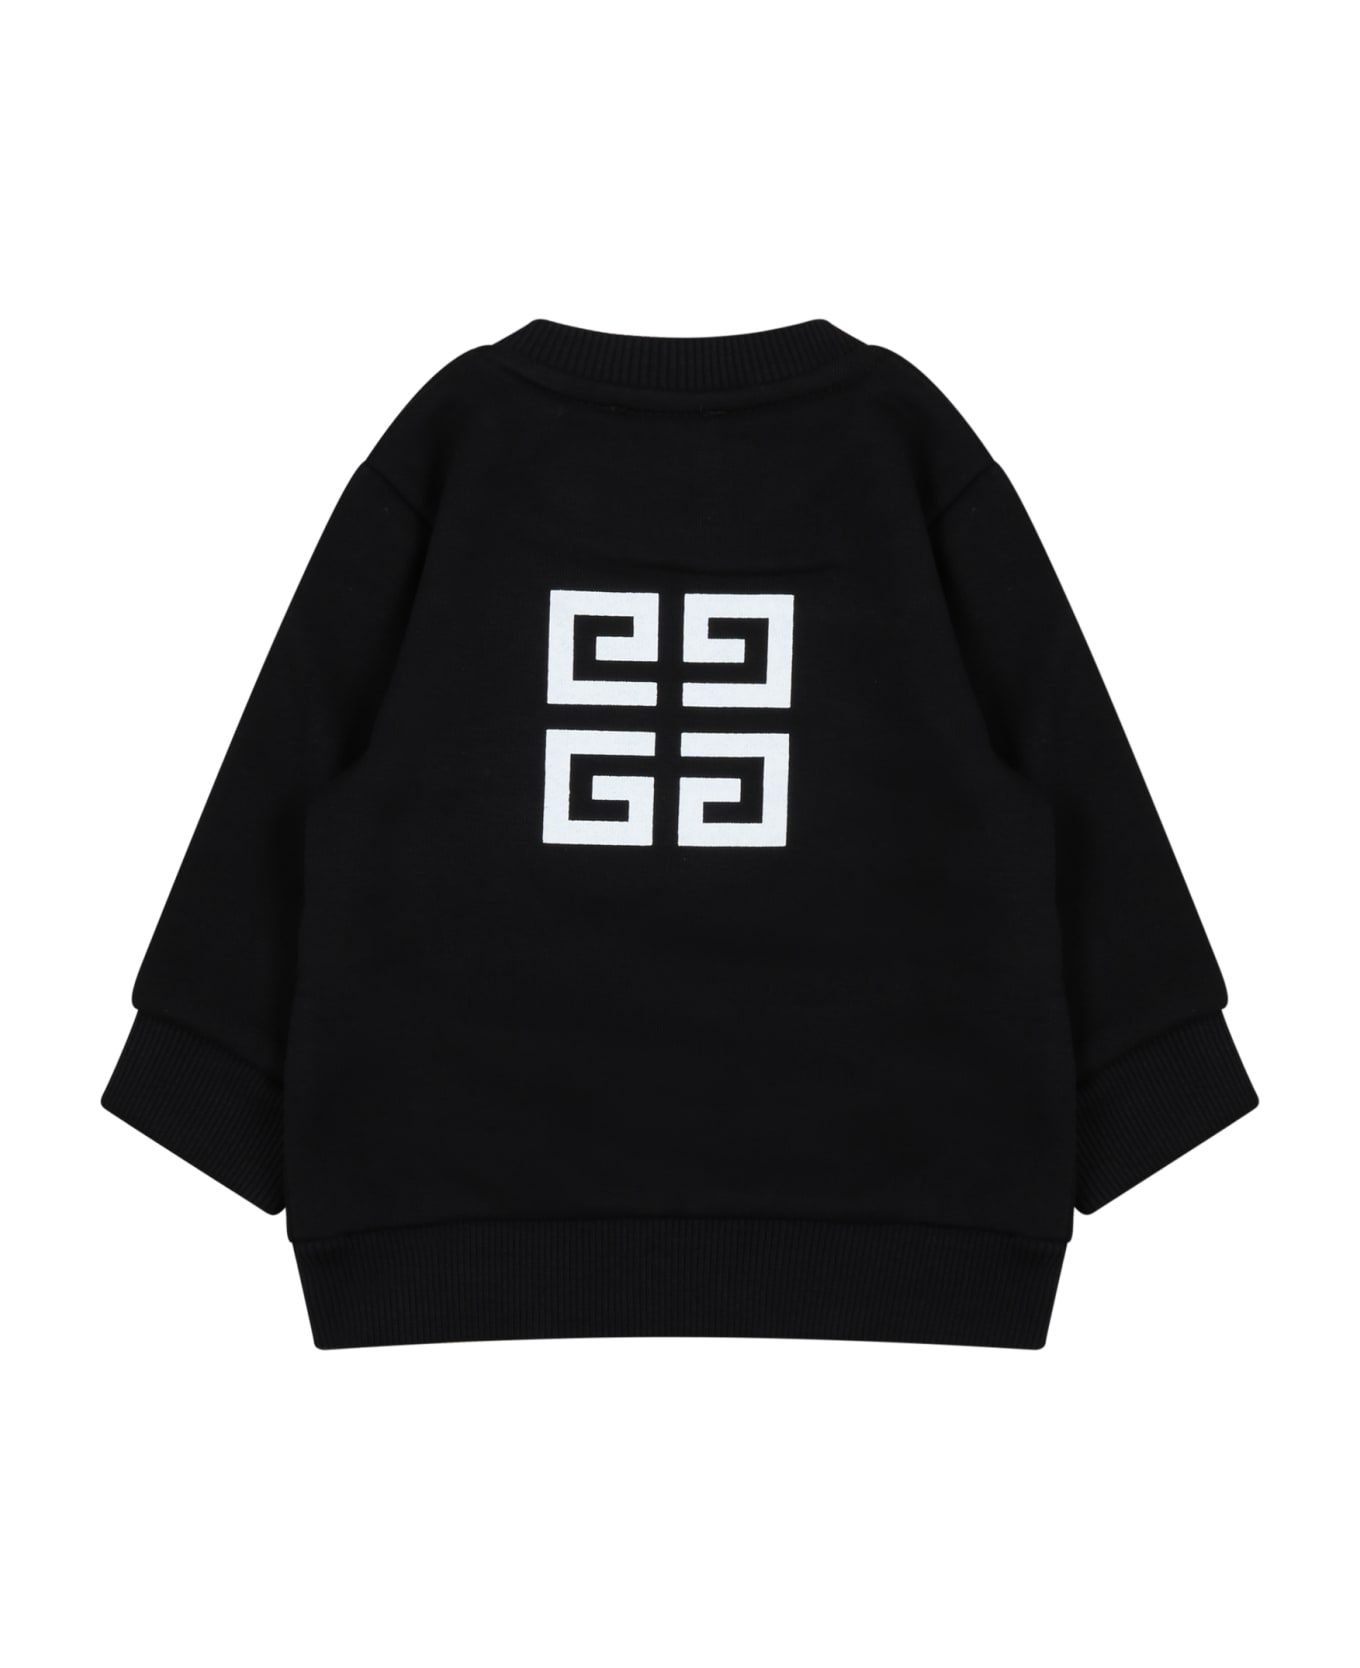 Givenchy Black Sweatshirt For Babies With Logo - Black